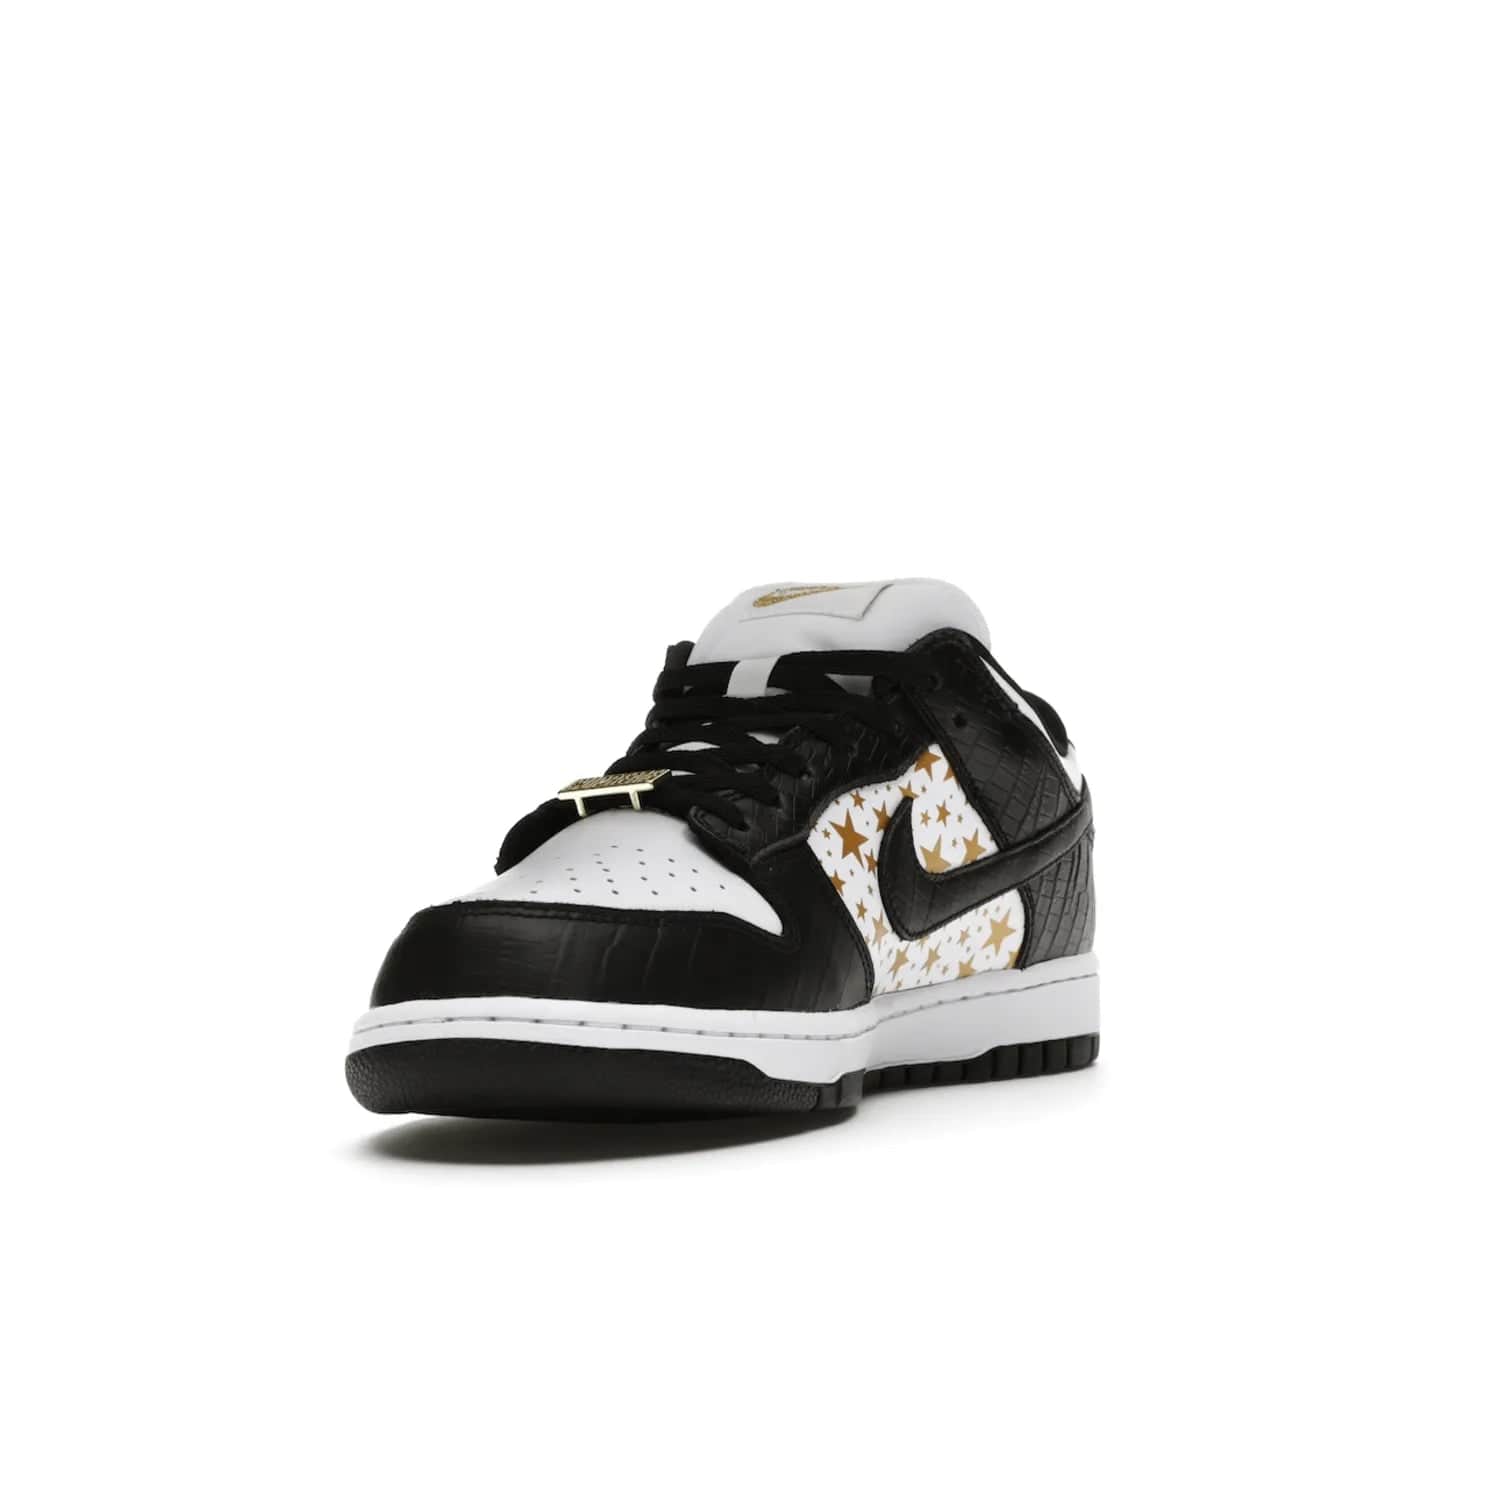 Nike SB Dunk Low Supreme Stars Black (2021) - Image 13 - Only at www.BallersClubKickz.com - Retro style and signature details make the Nike SB Dunk Low Supreme Black a must-have. This special edition shoe features a white leather upper and black croc skin overlays complemented by gold stars and deubré. Enjoy a piece of SB history and grab yours today.